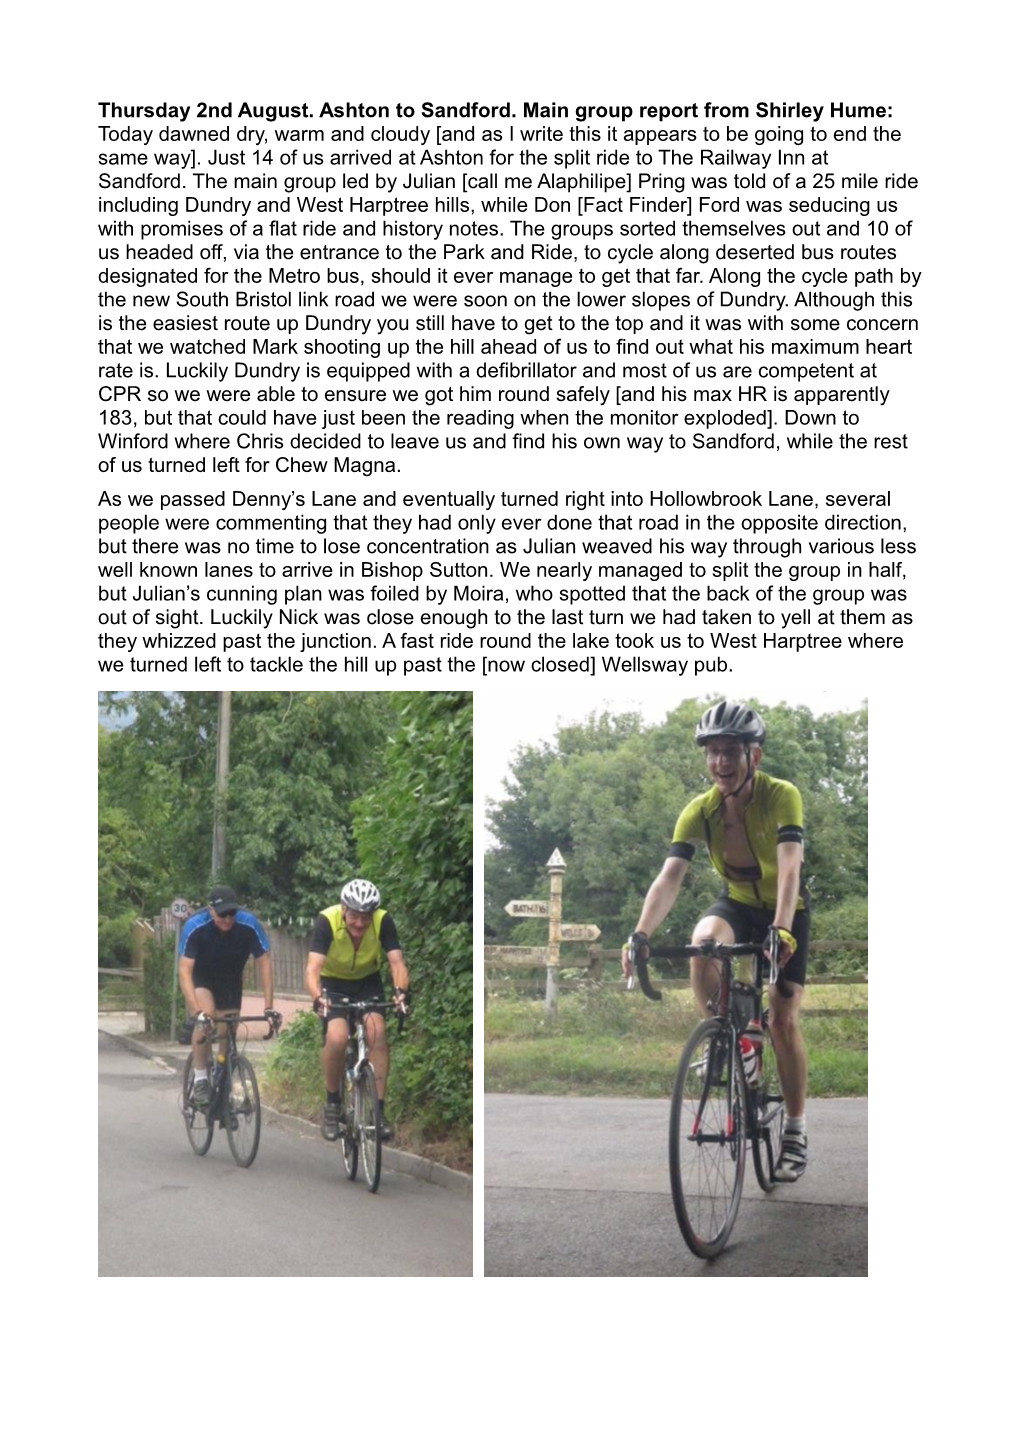 Thursday 2Nd August. Ashton to Sandford. Main Group Report from Shirley Hume